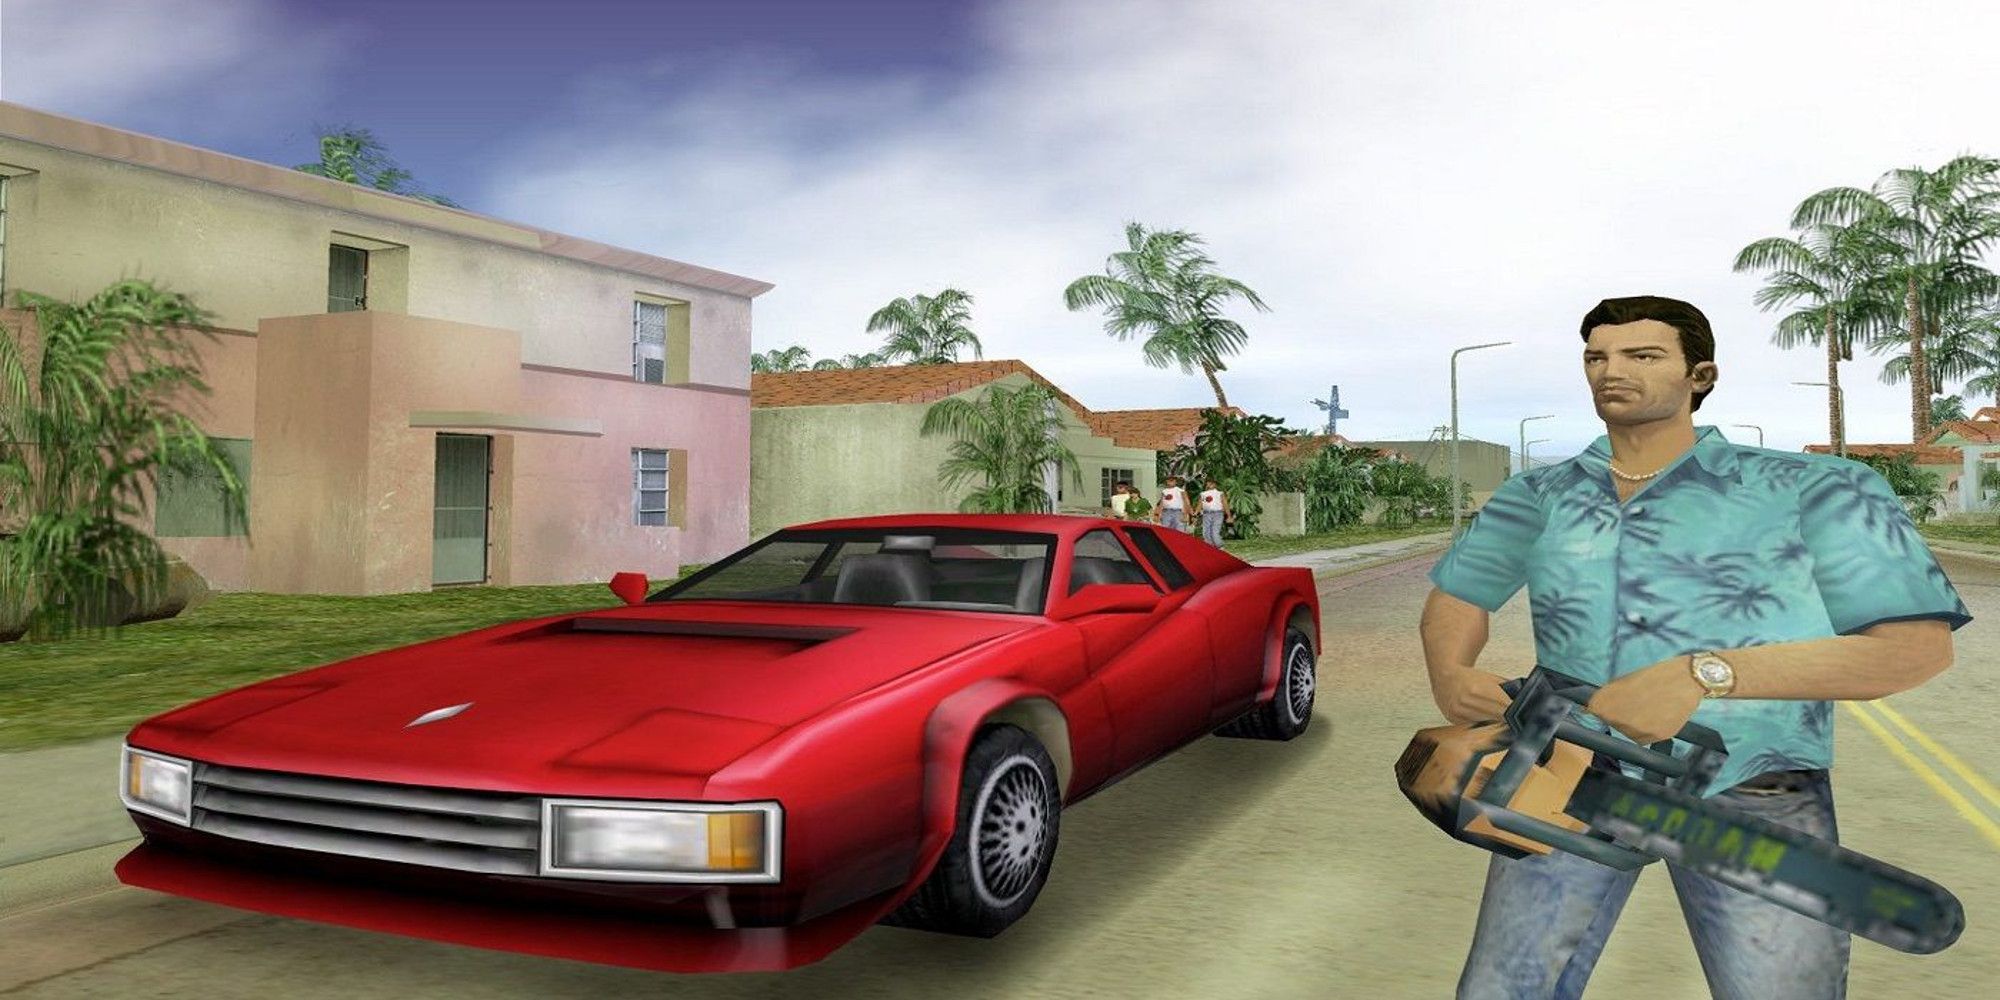 Tommy Vercetti poses with his chainsaw next to a red sports car in Grand Theft Auto: Vice CIty